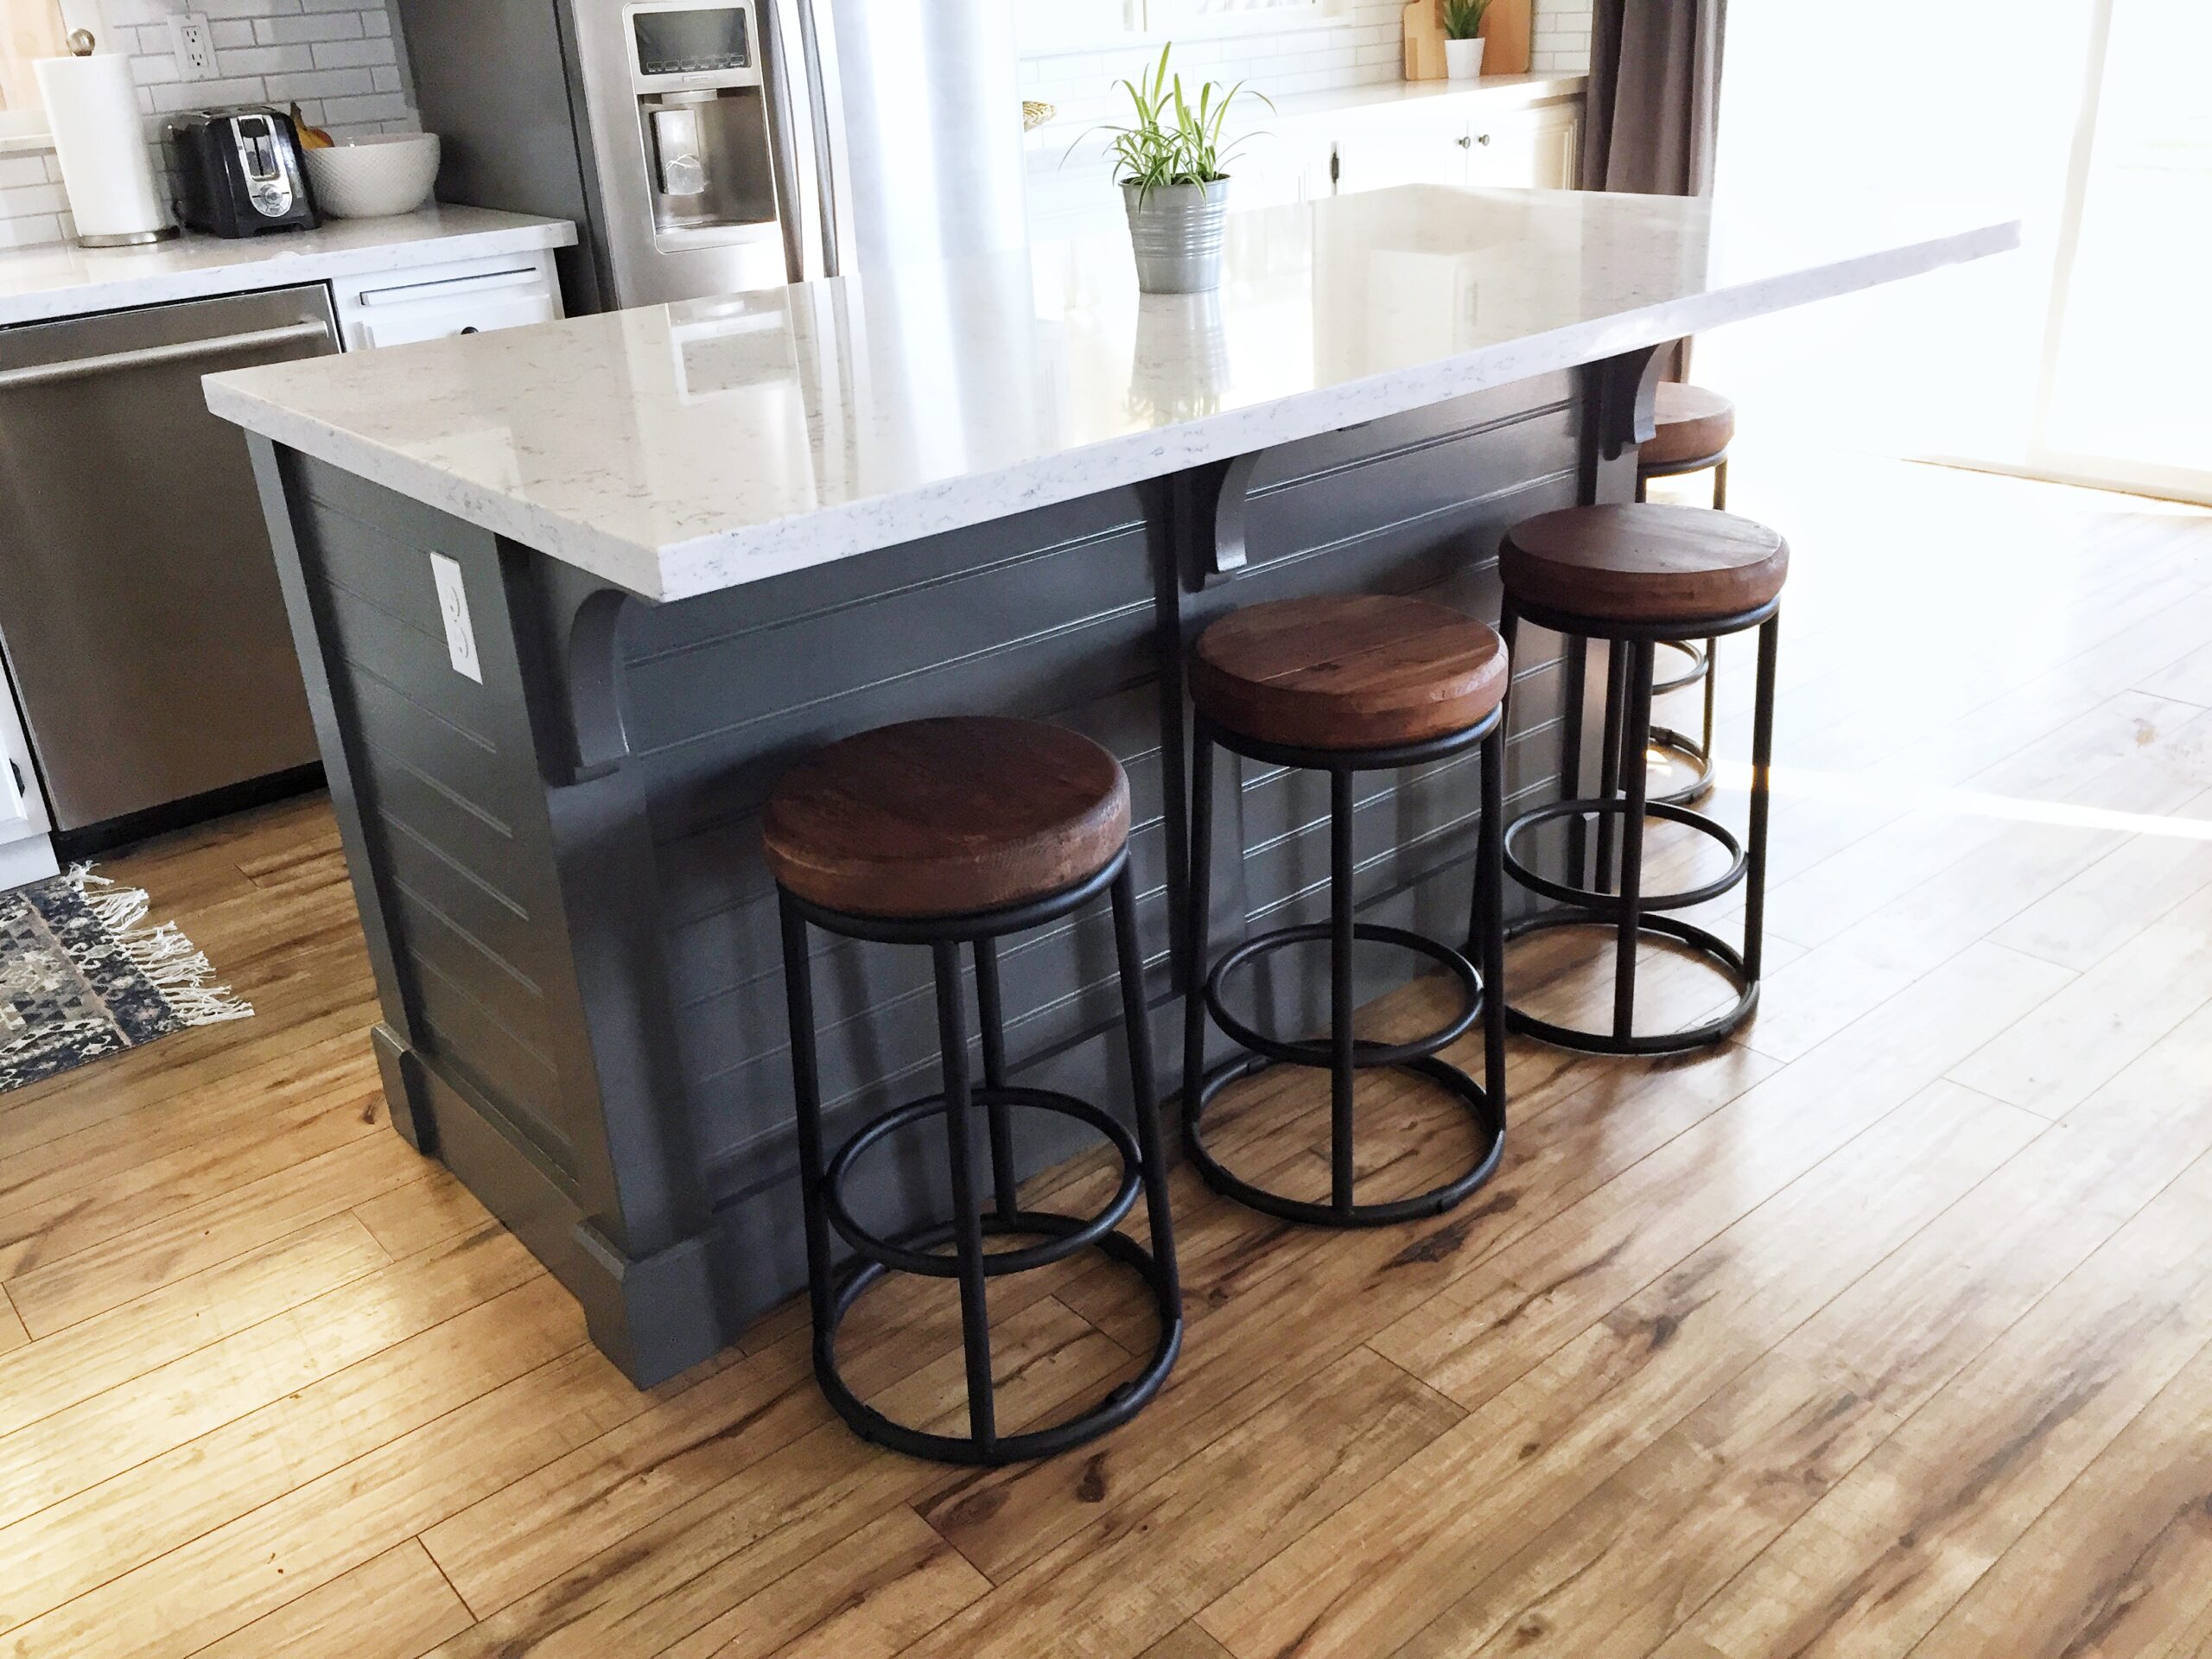 A Diy Kitchen Island Make It Yourself, How To Build A Movable Kitchen Island